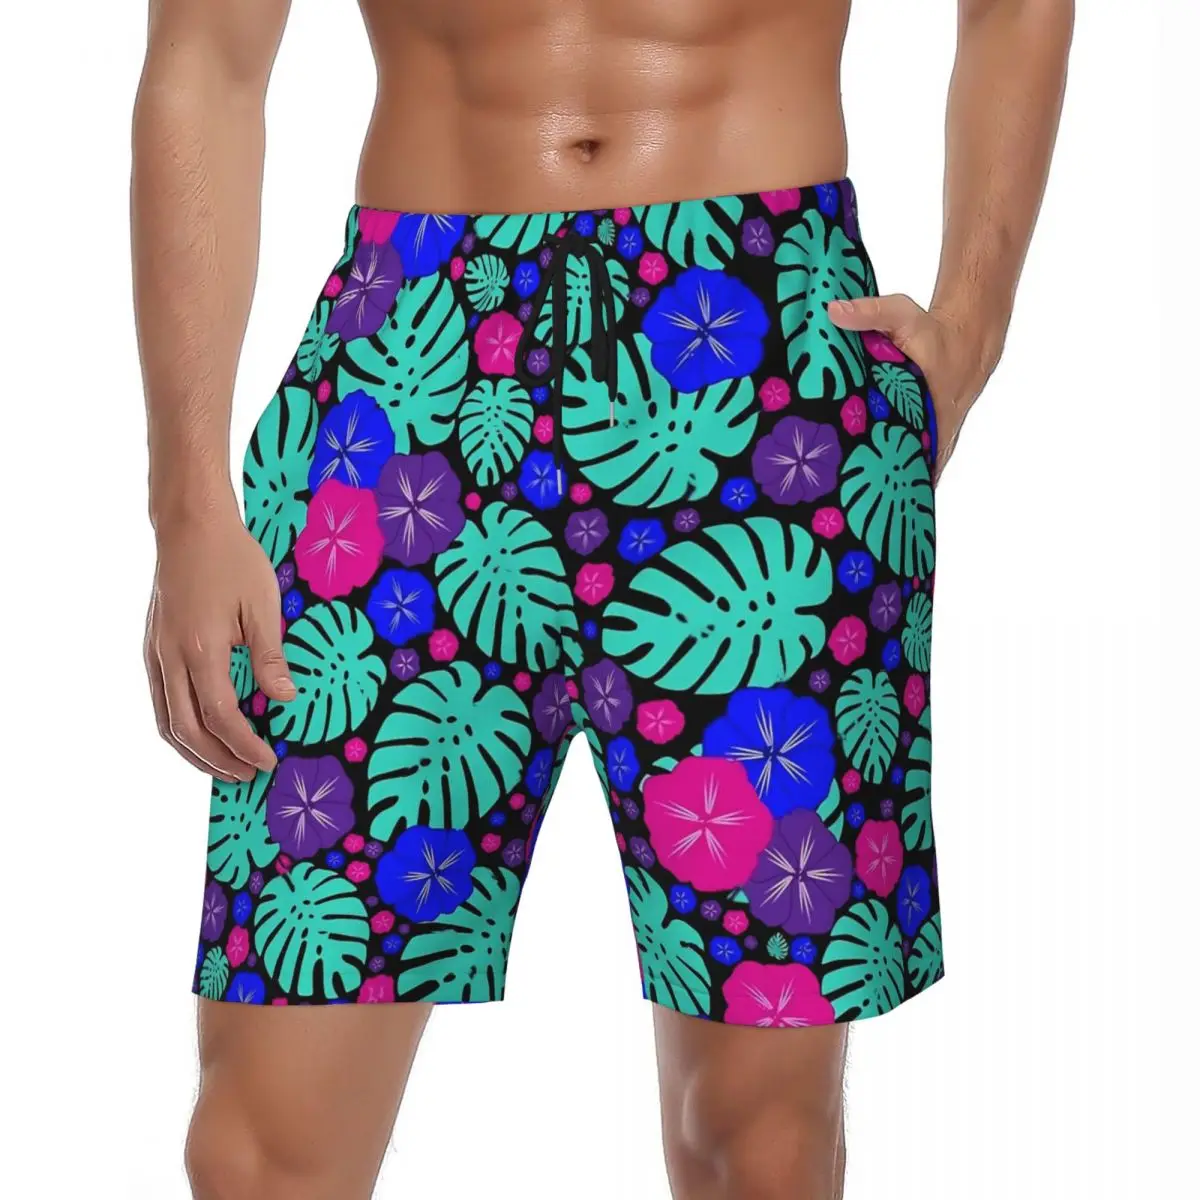 

Bathing Suit Tropical Floral Gym Shorts Summer Hibiscus Print Casual Board Short Pants Male Sports Surf Quick Dry Swim Trunks